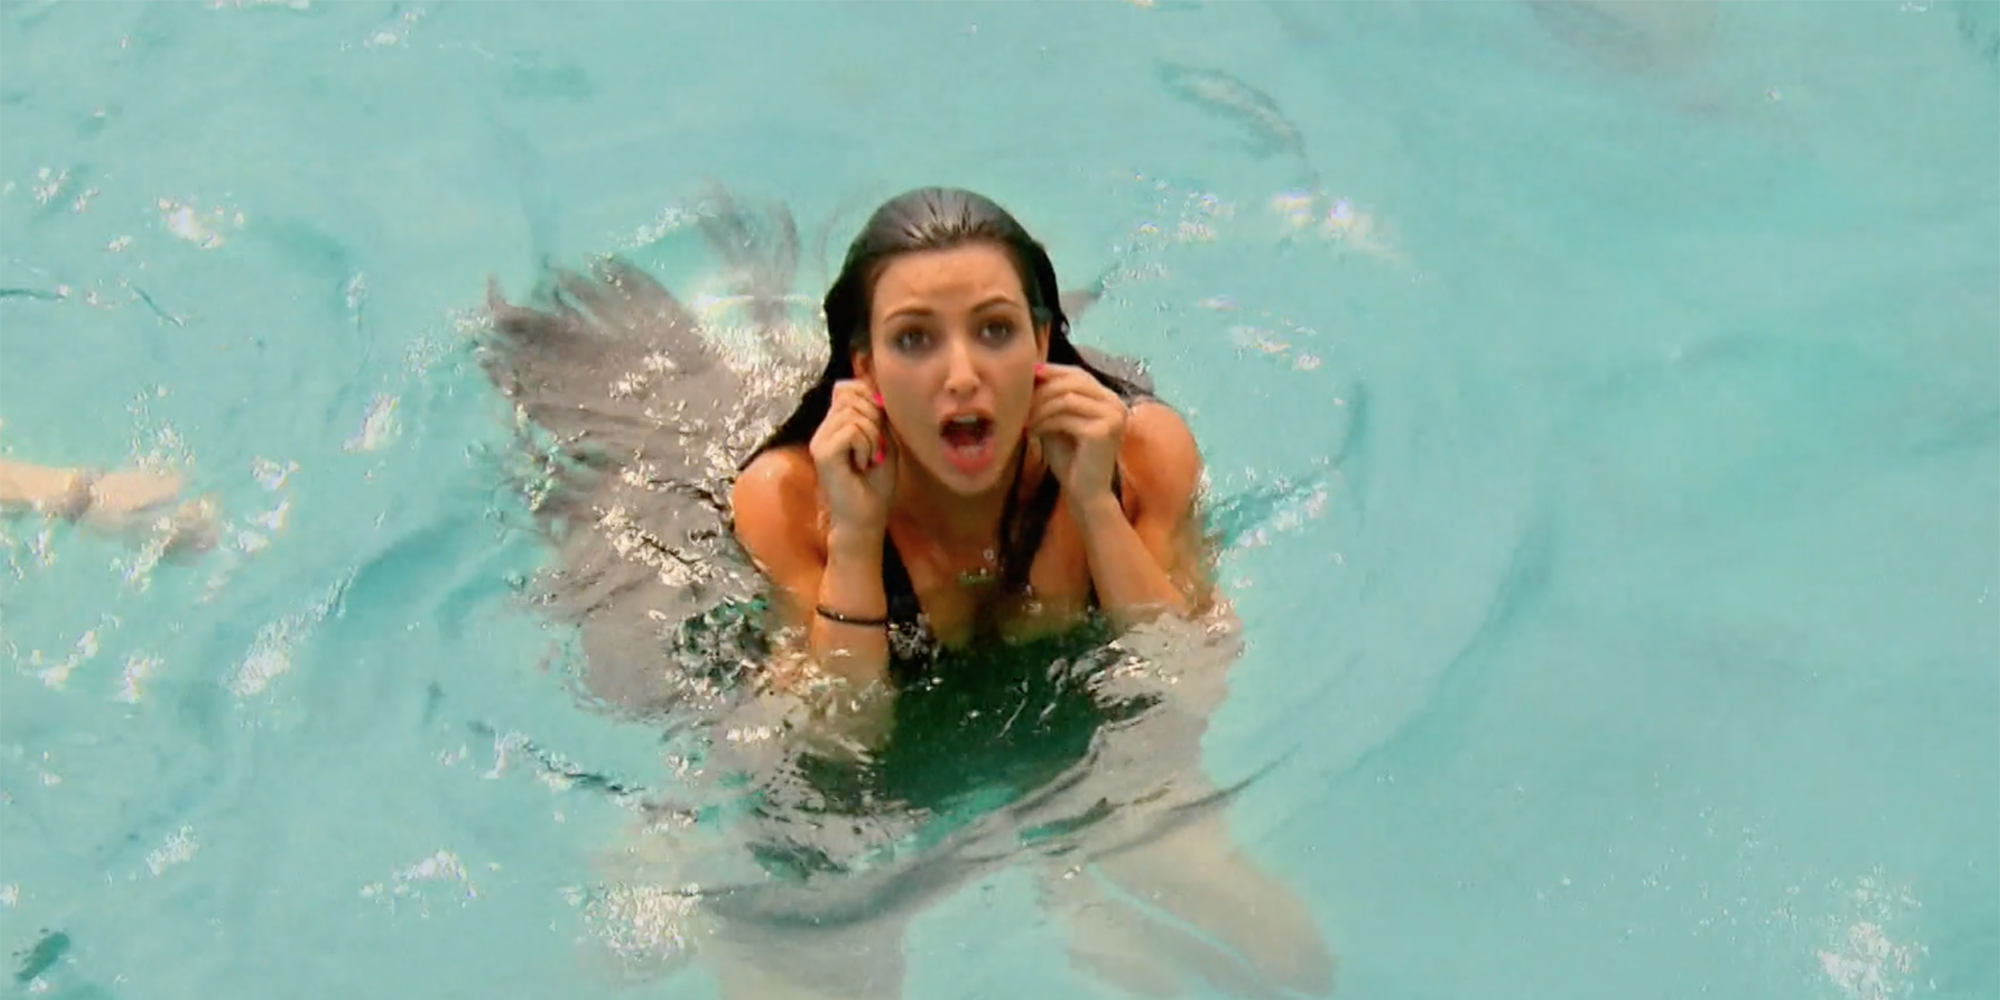 Kim loses her earring in the ocean in Keeping Up with the Kardashians